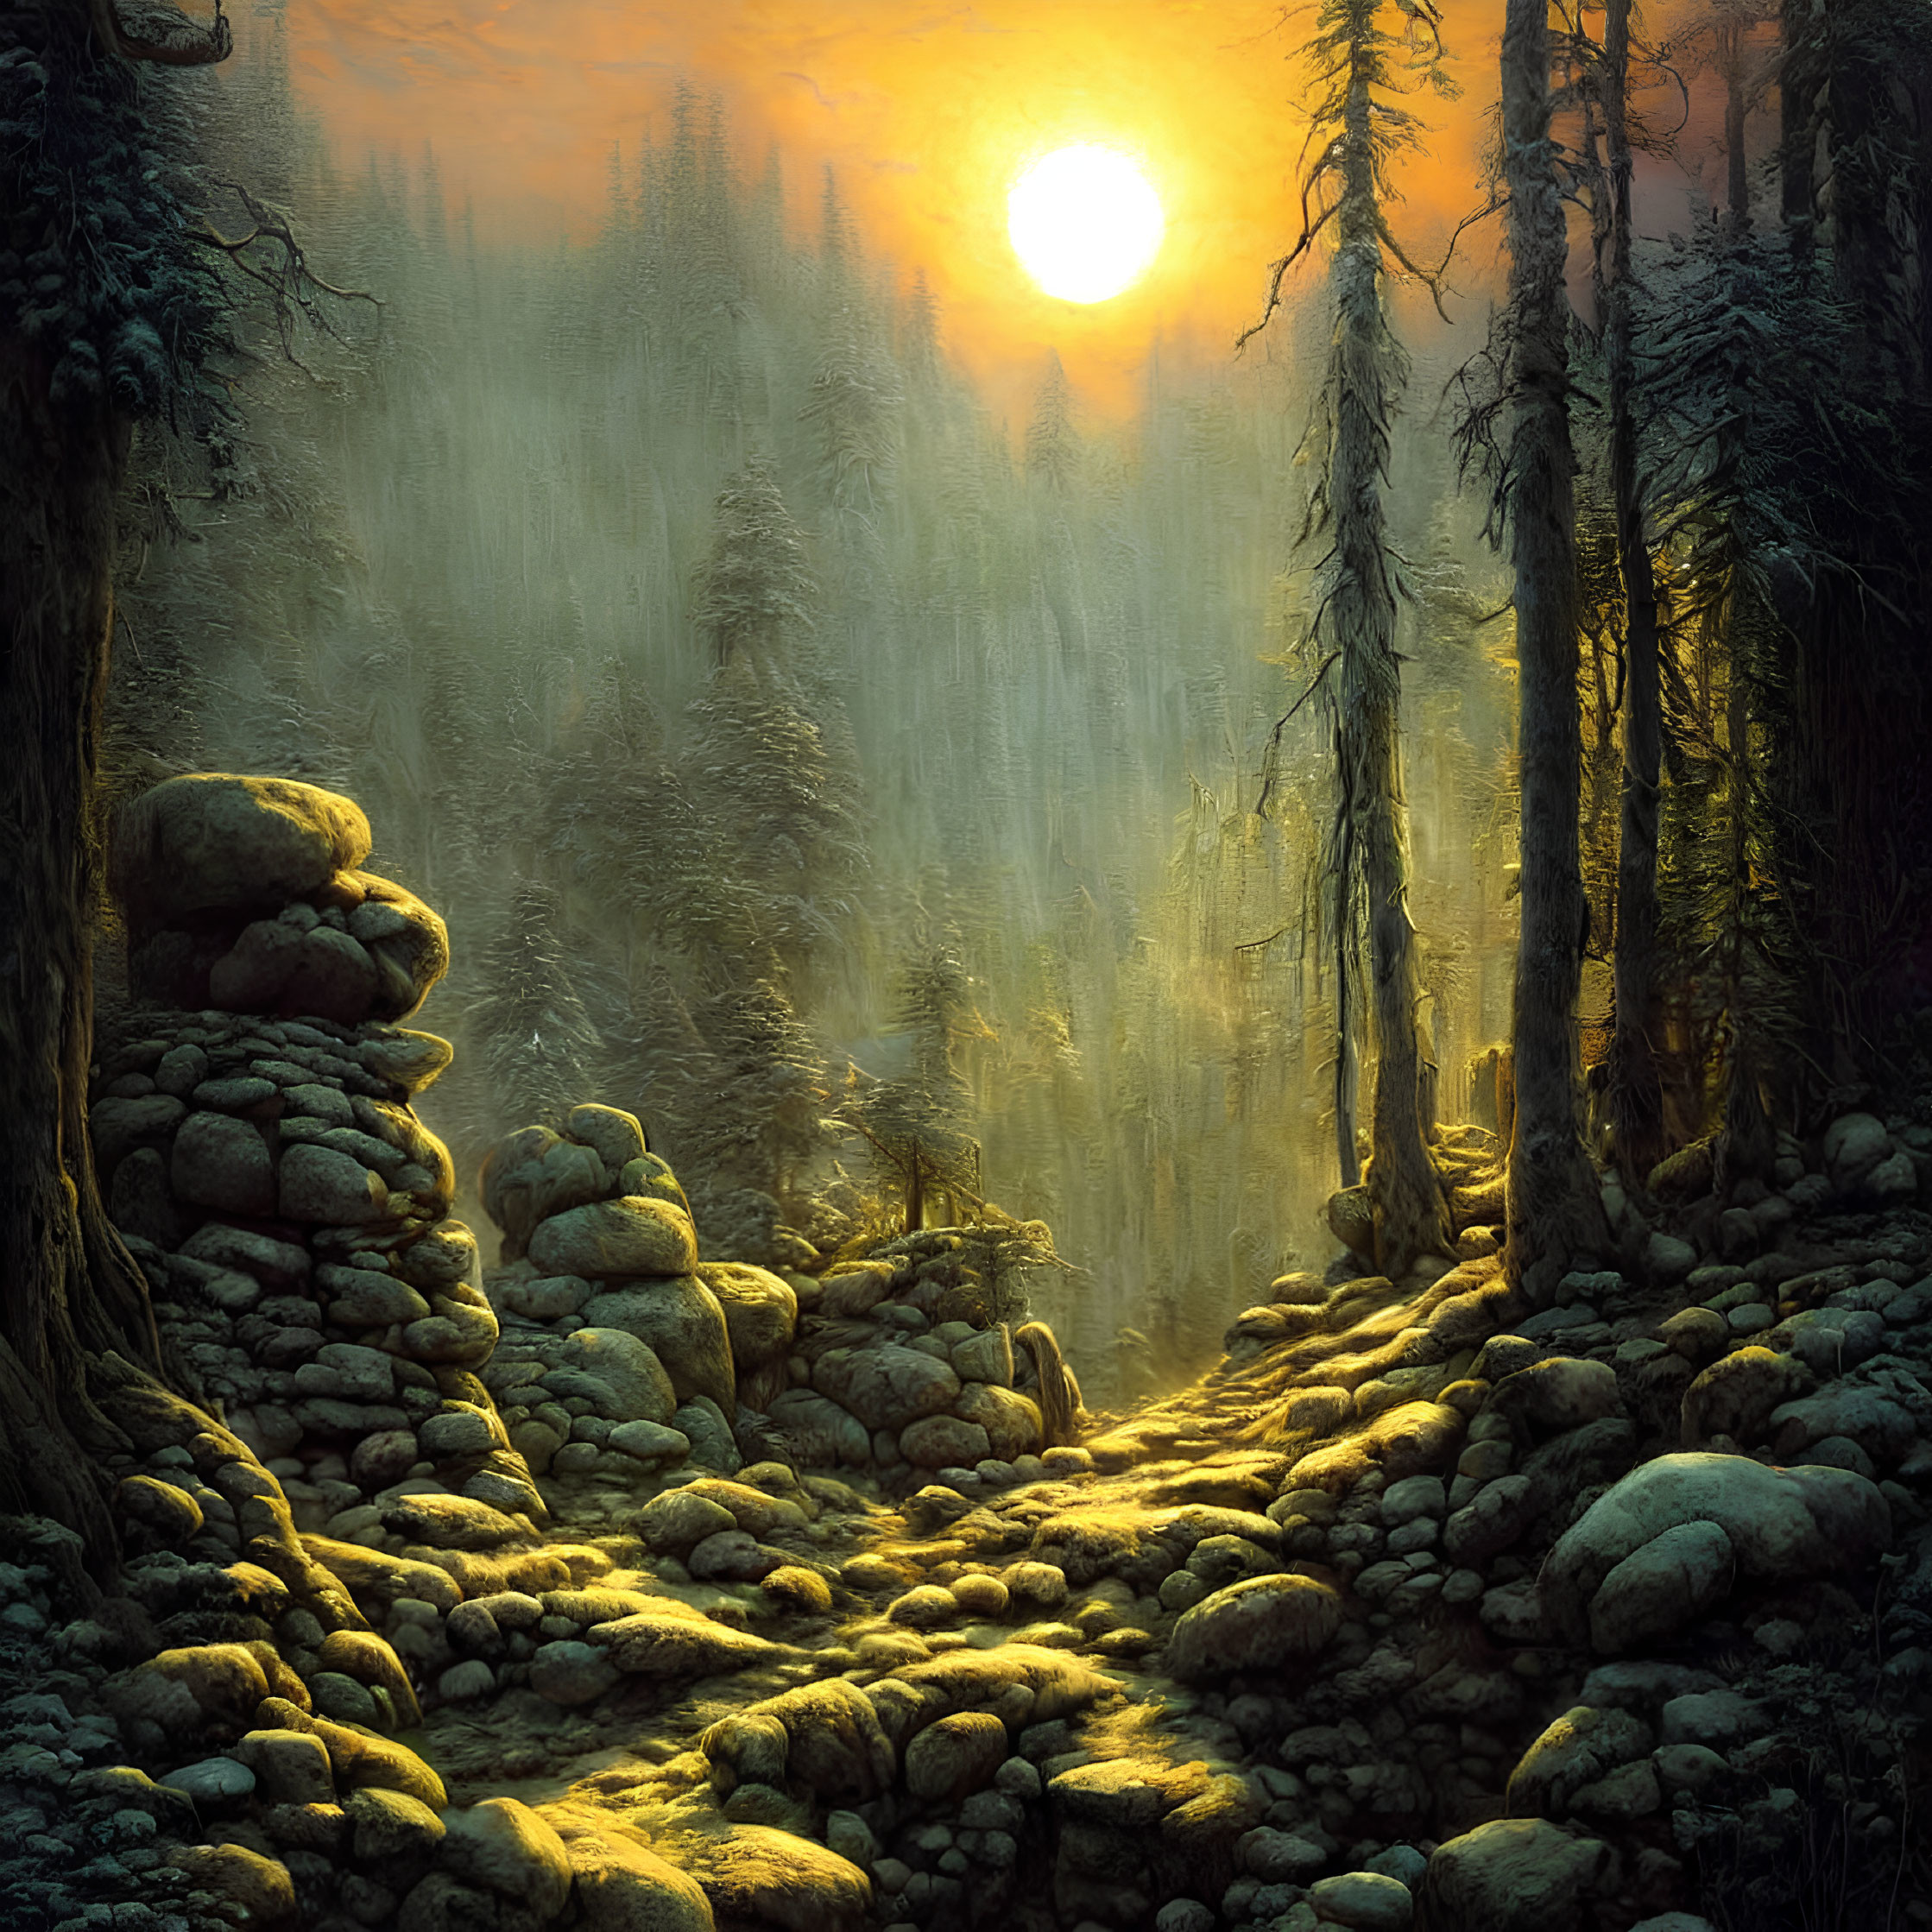 Enchanting forest path with rocky outcrops and towering trees in golden sunlight